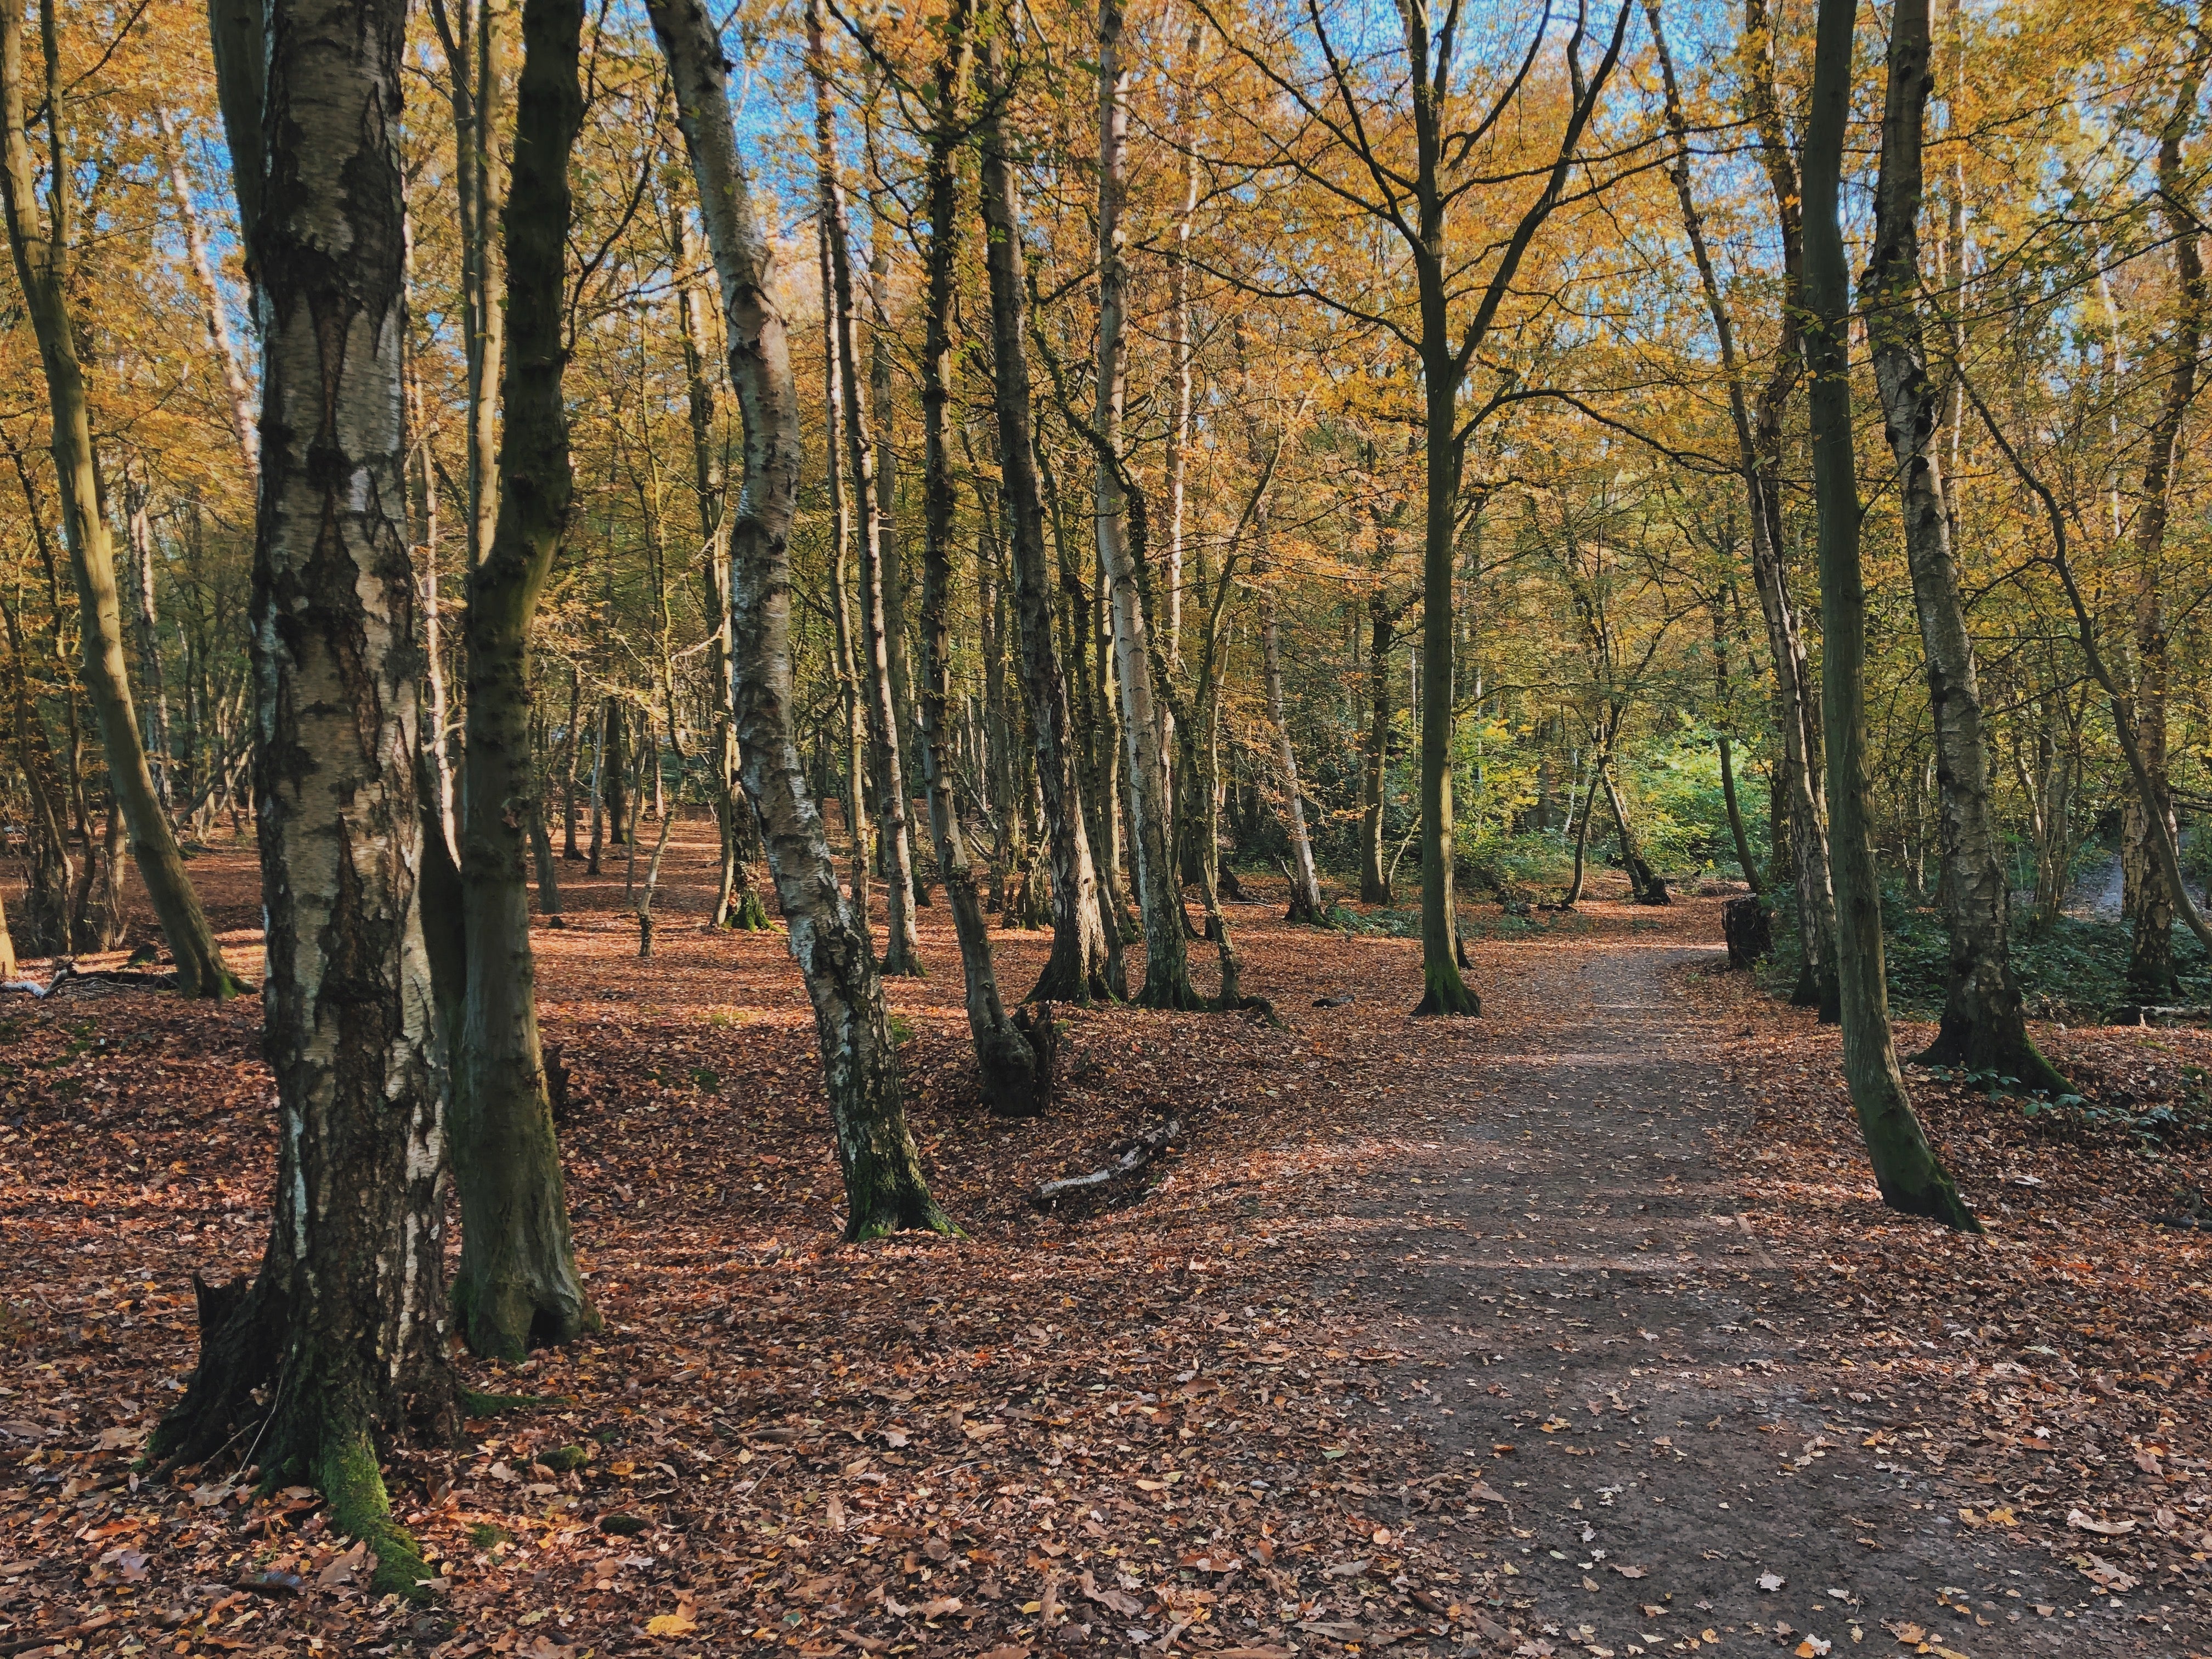 Wood for the trees: a woodland in autumn can be just the place to find peace